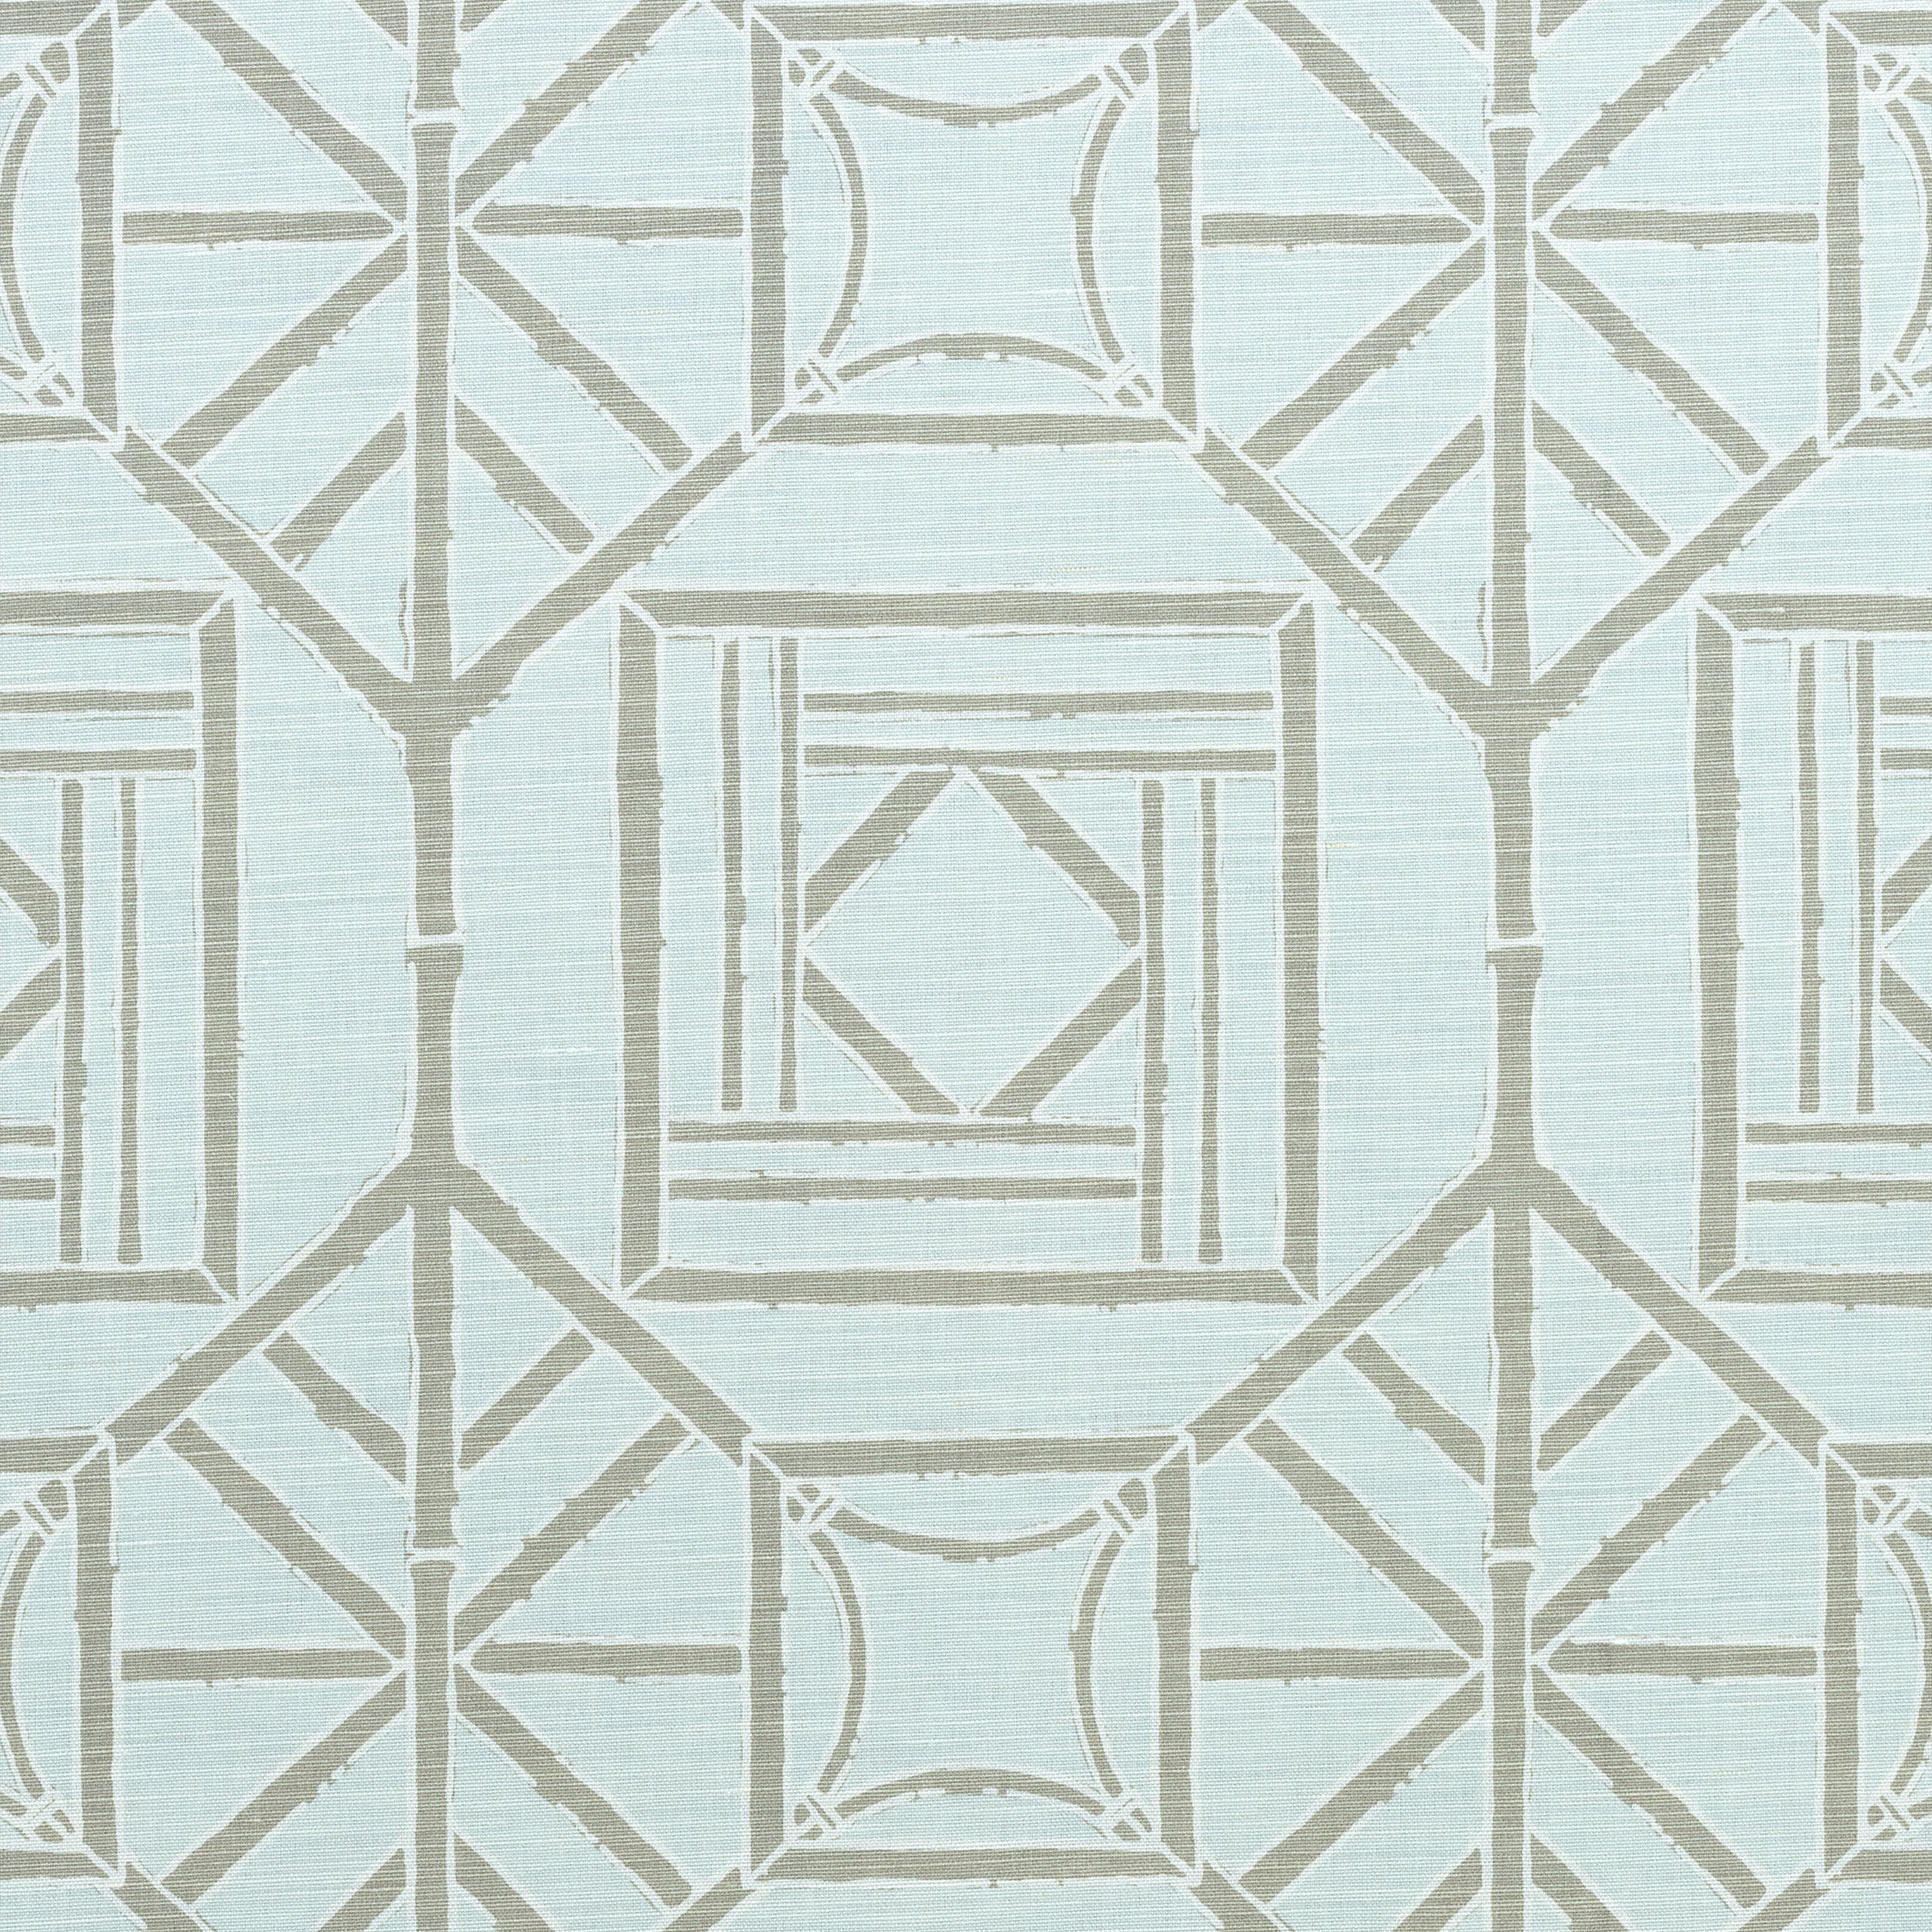 Shoji Panel fabric in aqua color - pattern number F975519 - by Thibaut in the Dynasty collection